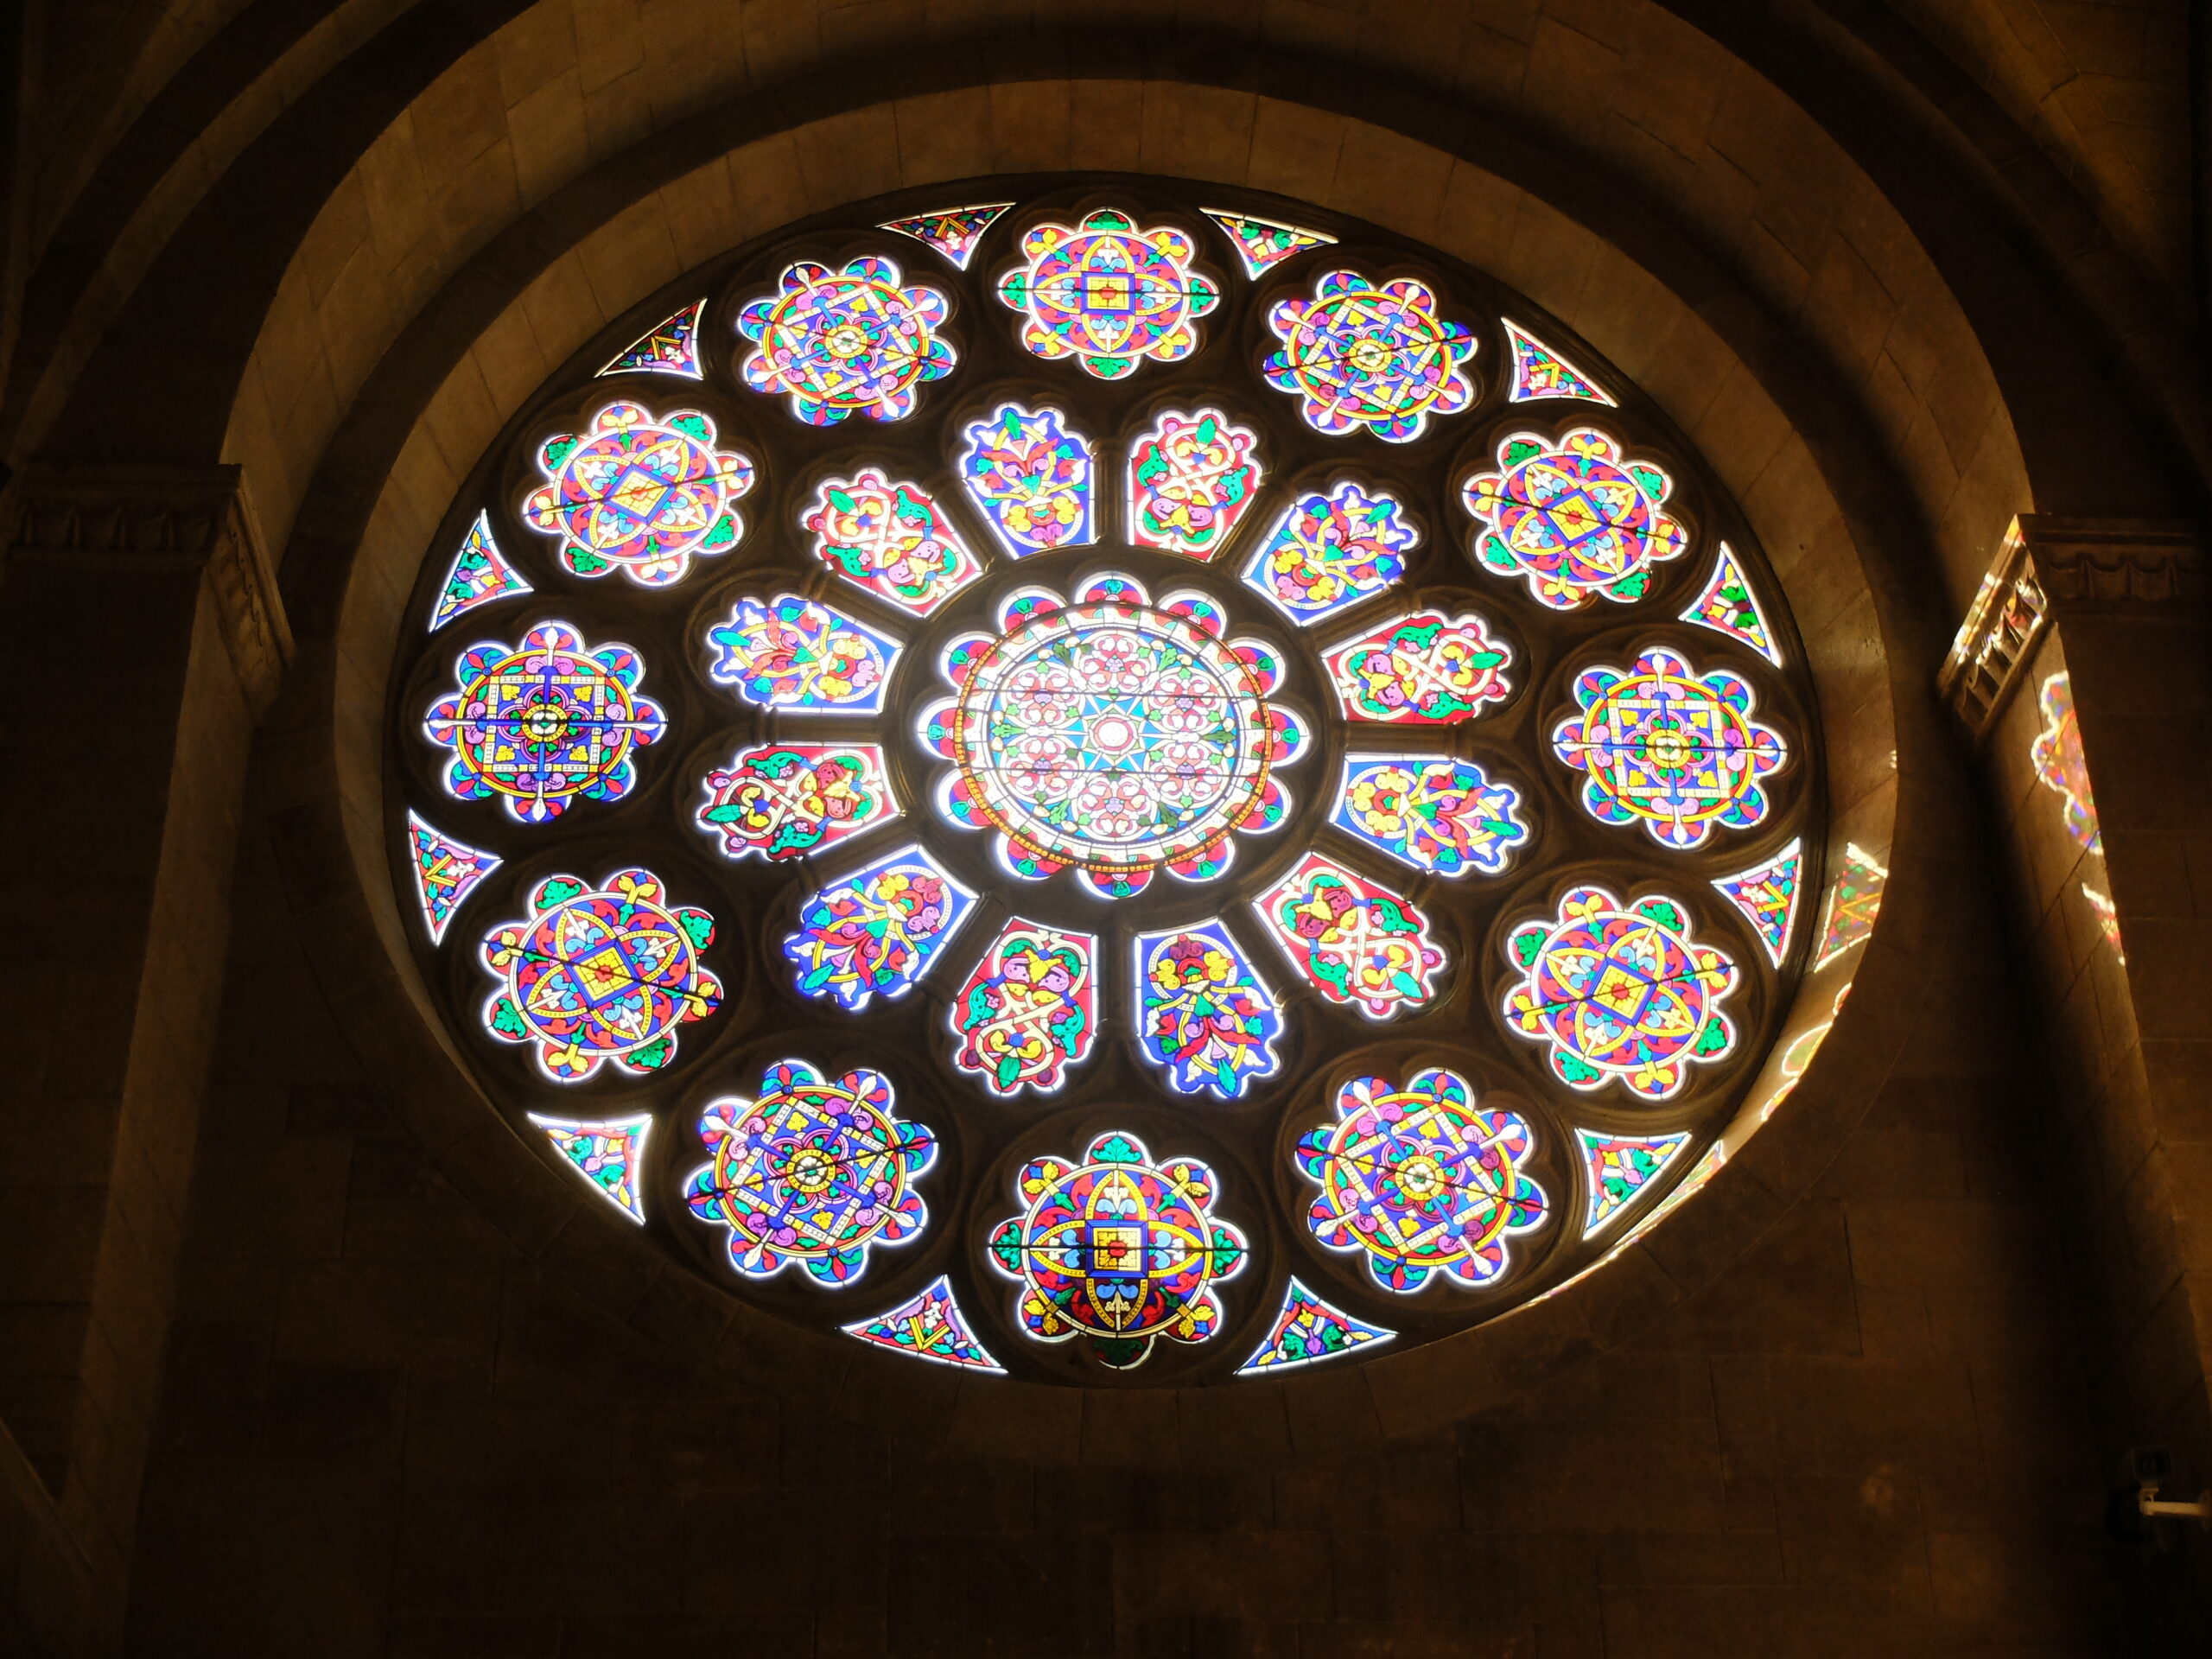 Large, round, colorful stained-glass window with light shining through onto building interior